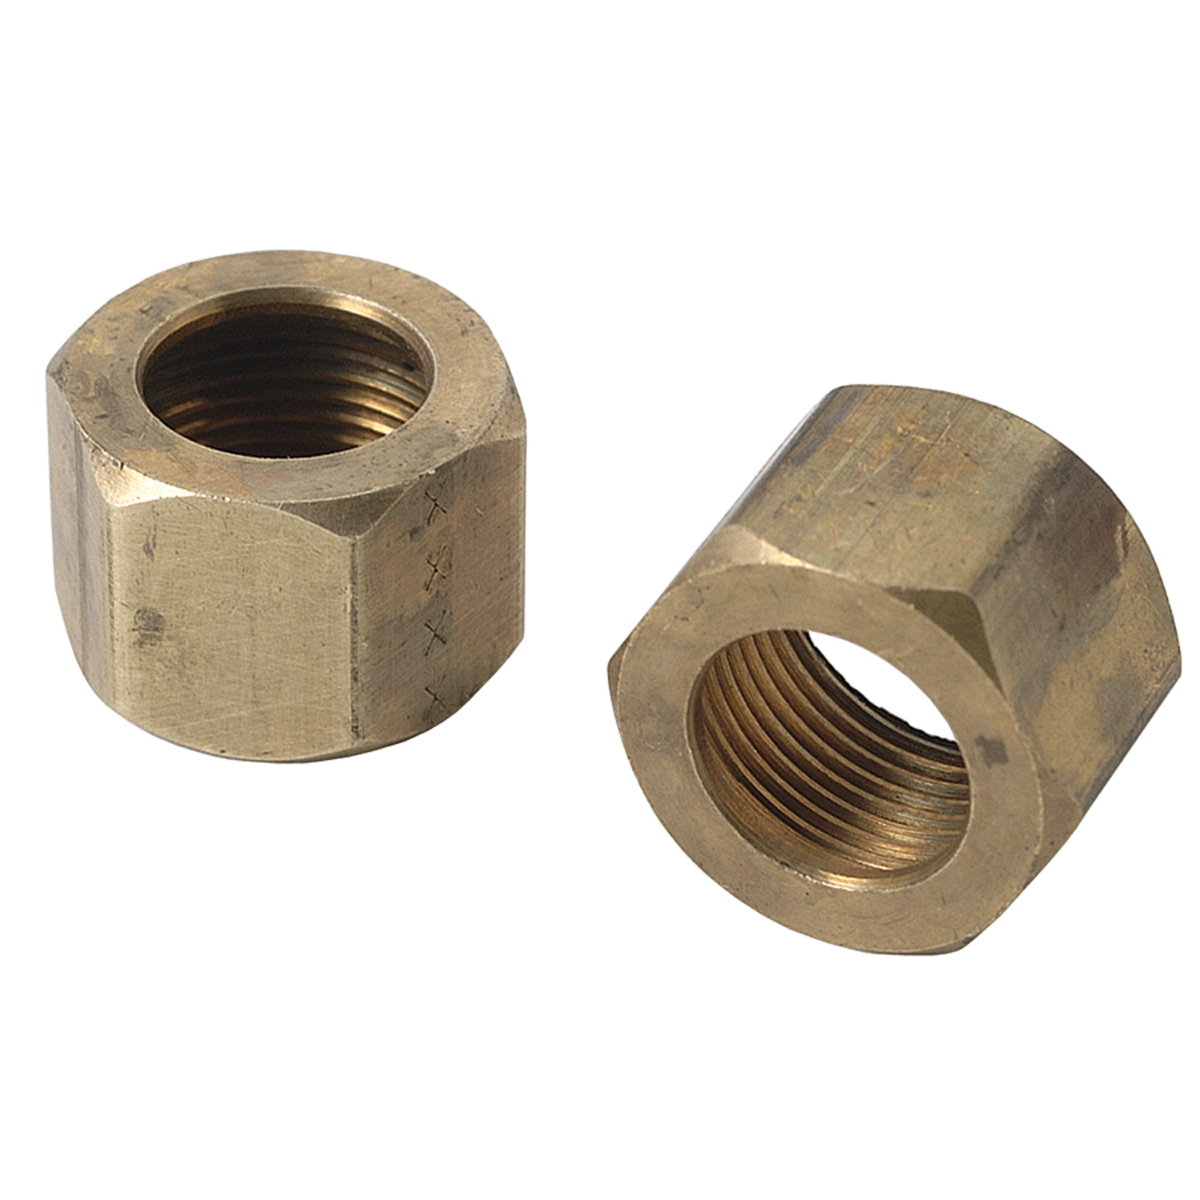 Compression Fitting Nuts